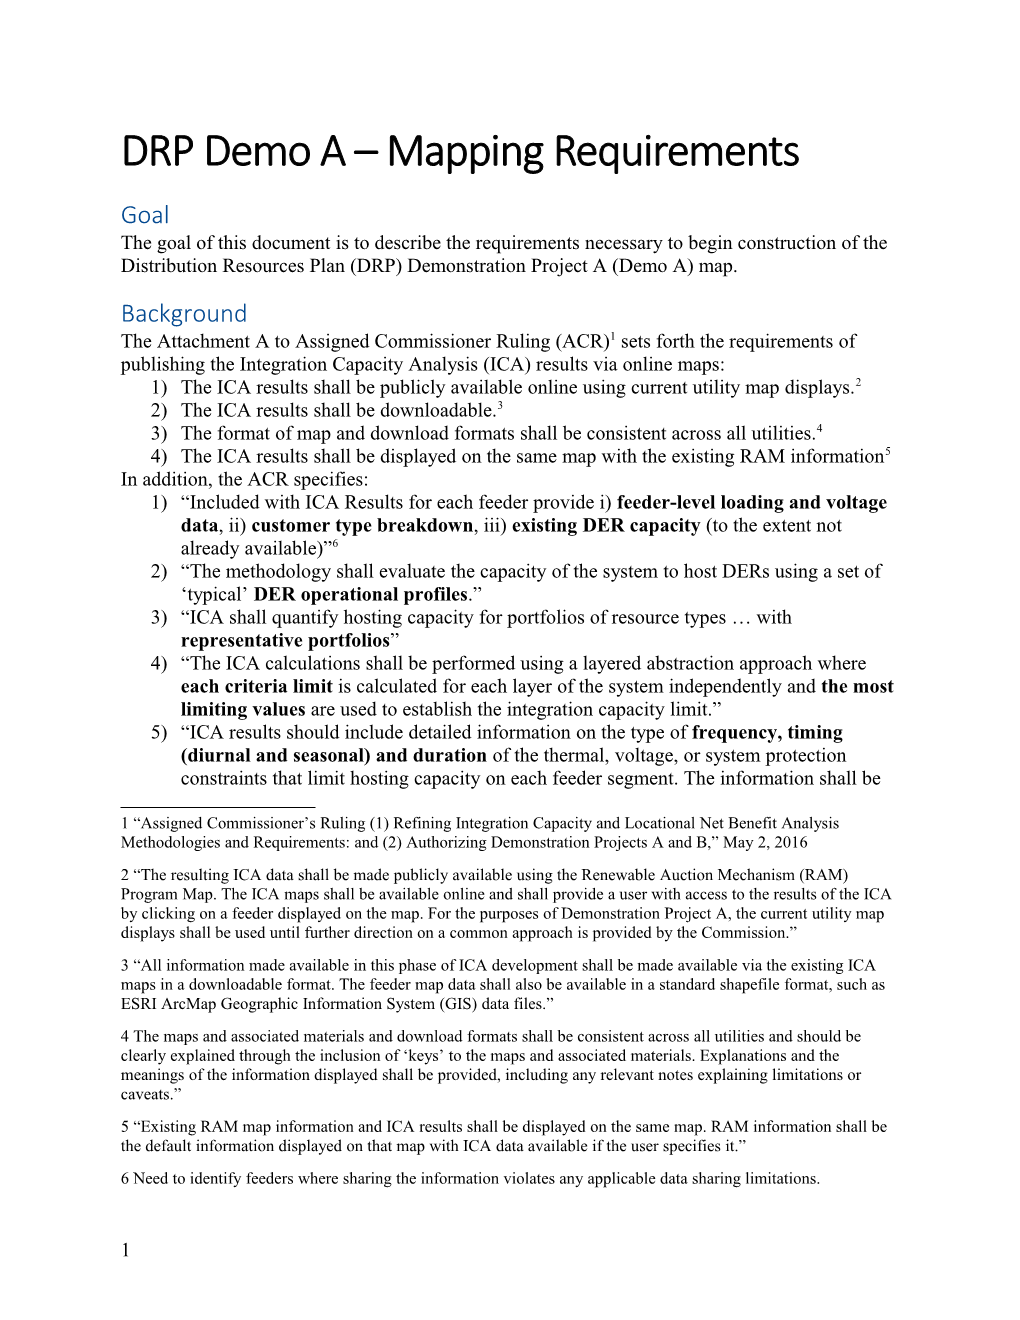 DRP Demo a Mapping Requirements